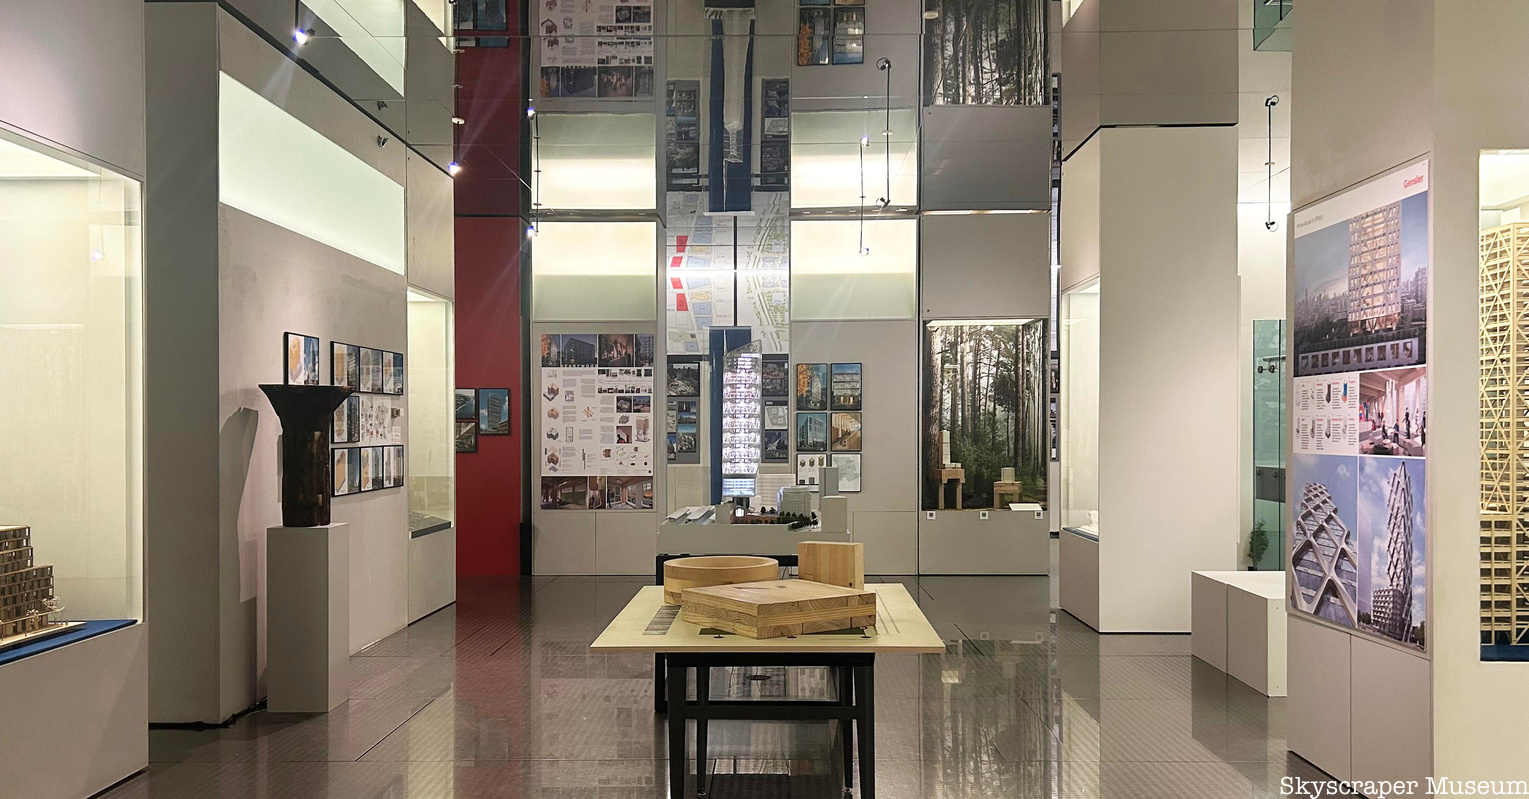 See Models of Wood Skyscrapers at a New Skyscraper Museum Exhibit – Untapped...